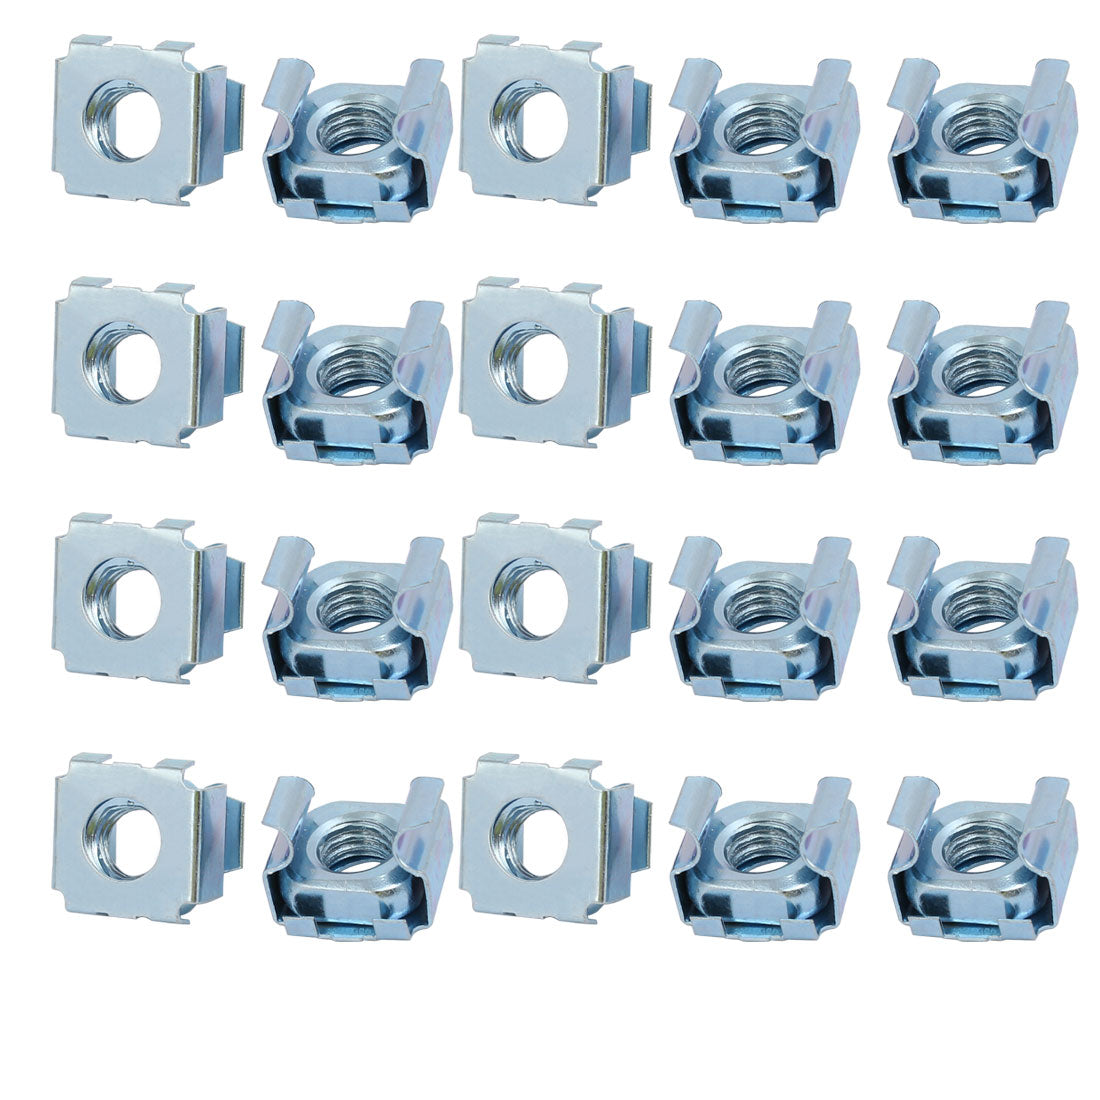 uxcell Uxcell 20pcs M8 65Mn Spring Steel Captive Cage Nut Silver Tone for Server Shelf Cabinet